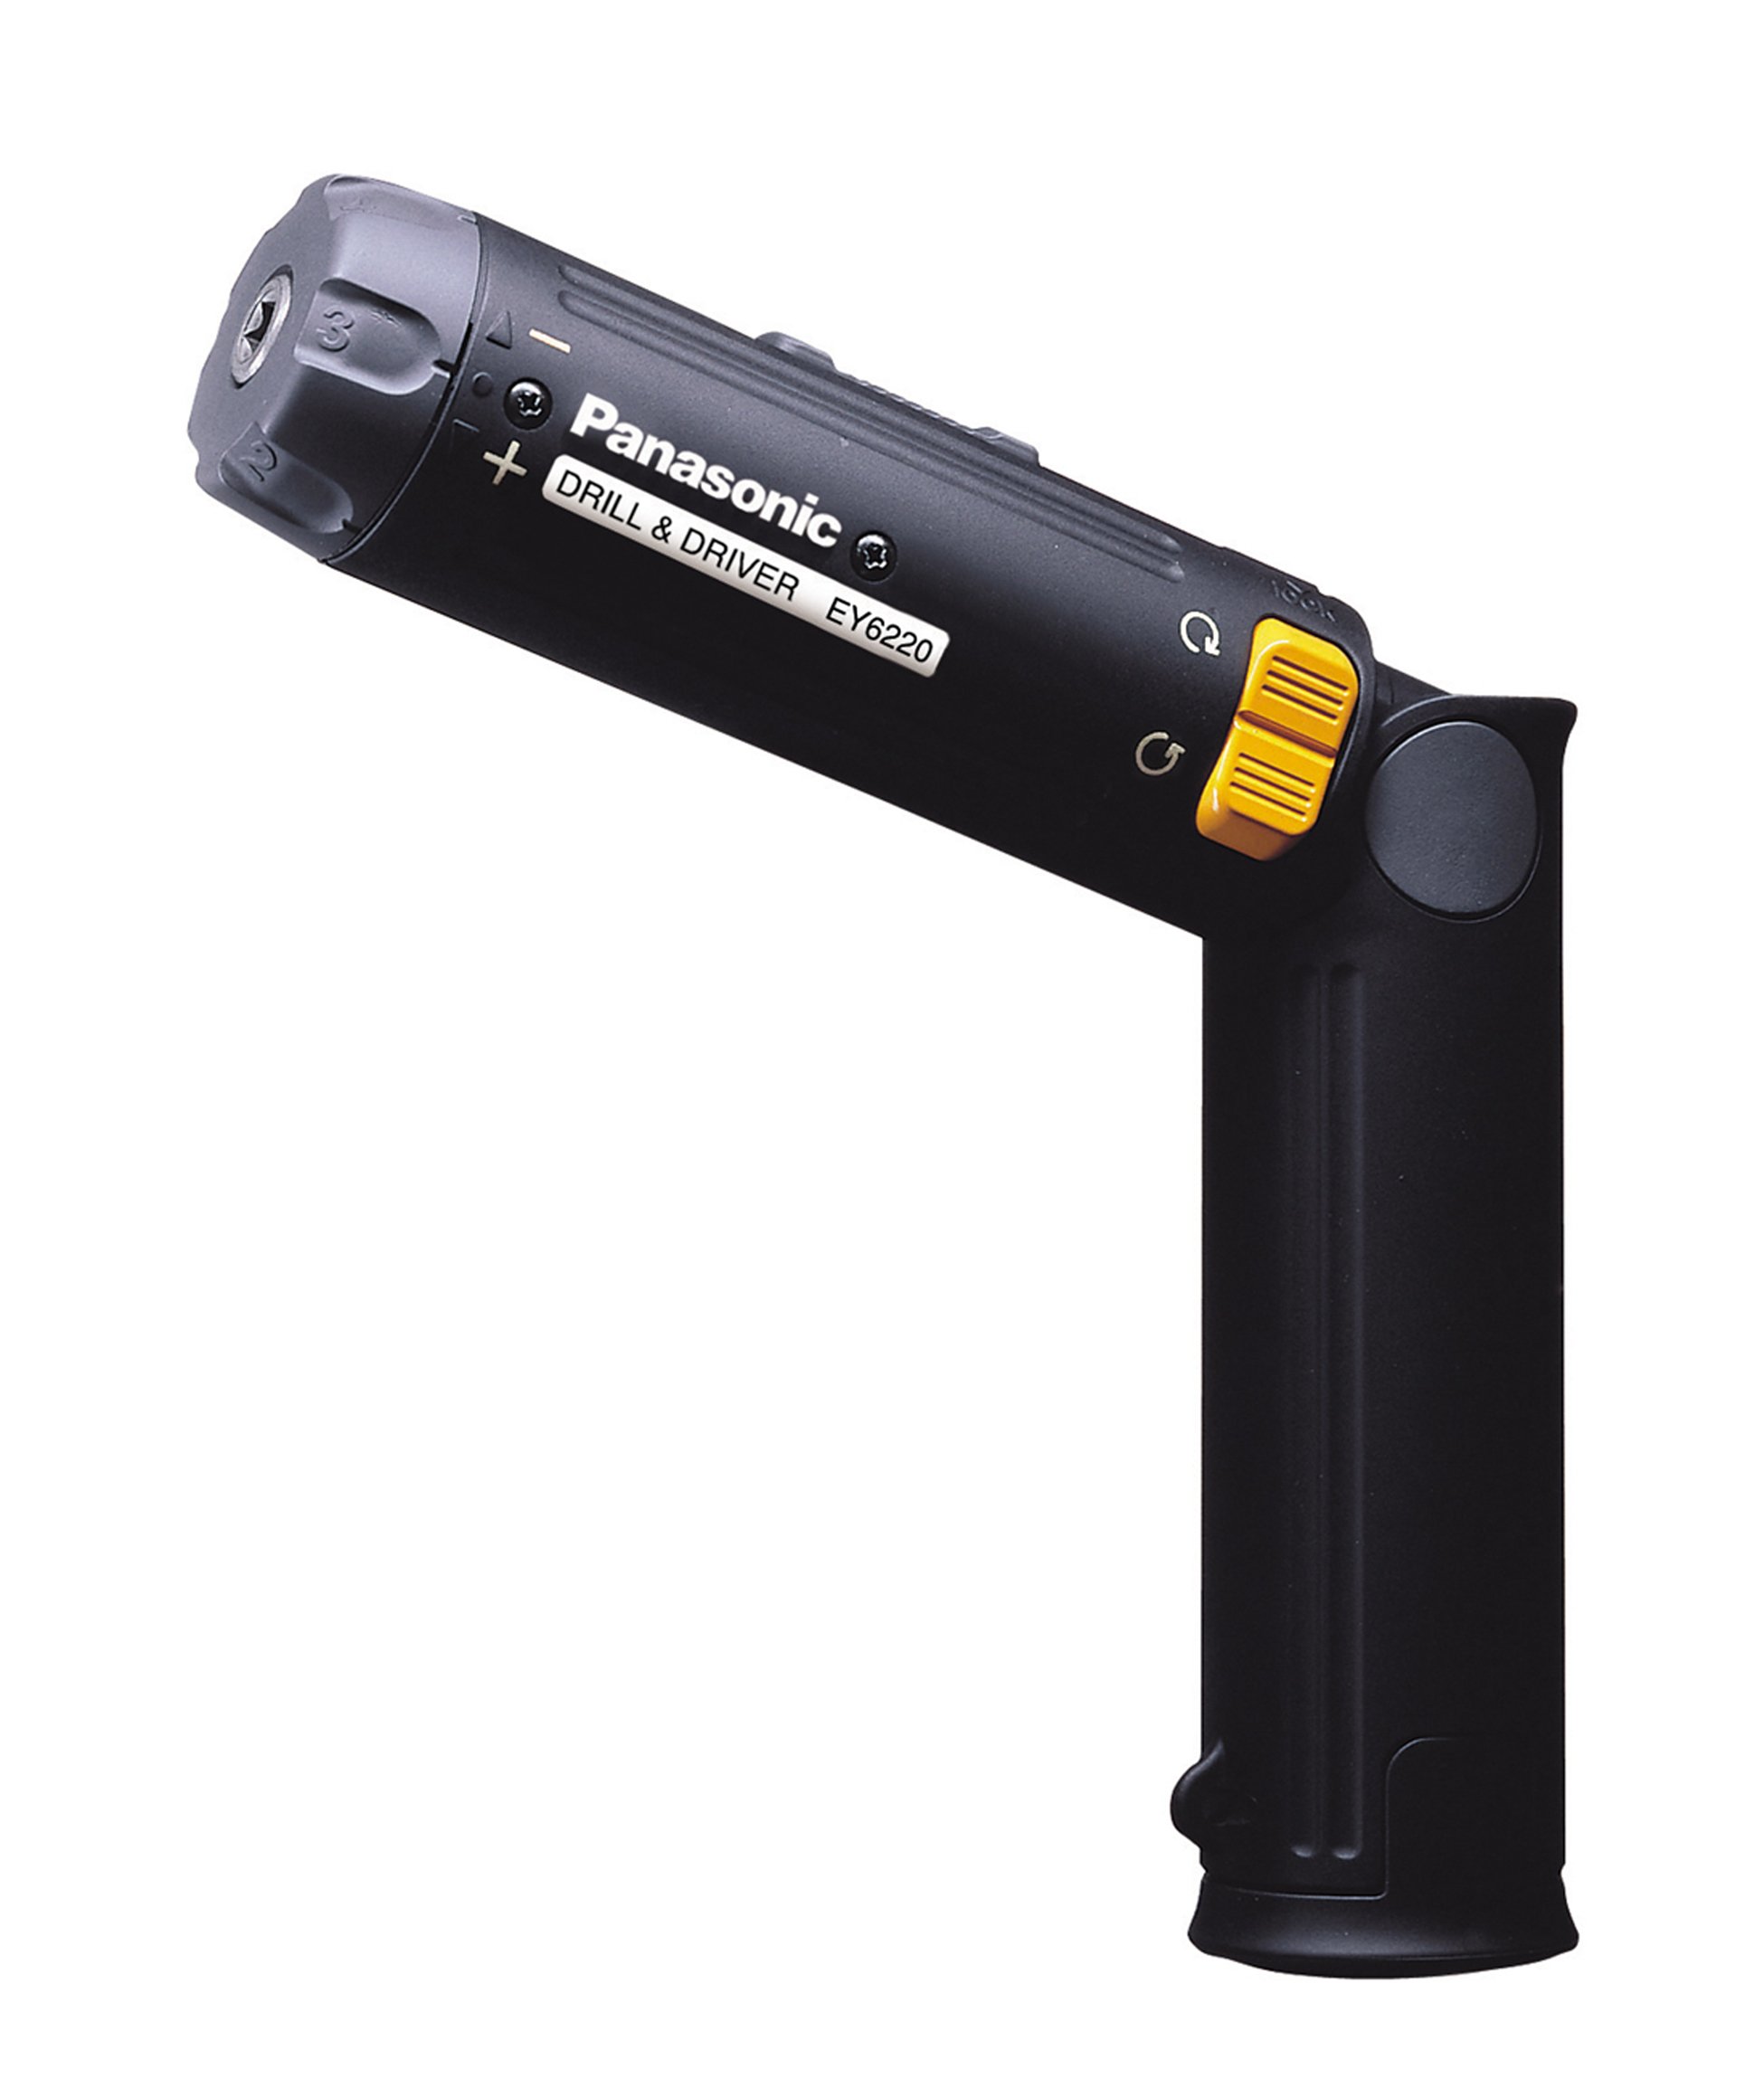 Panasonic EY6220N Cordless, Battery Powered, Rechargeable 2.4V Drill and Driver - Tool and Battery only